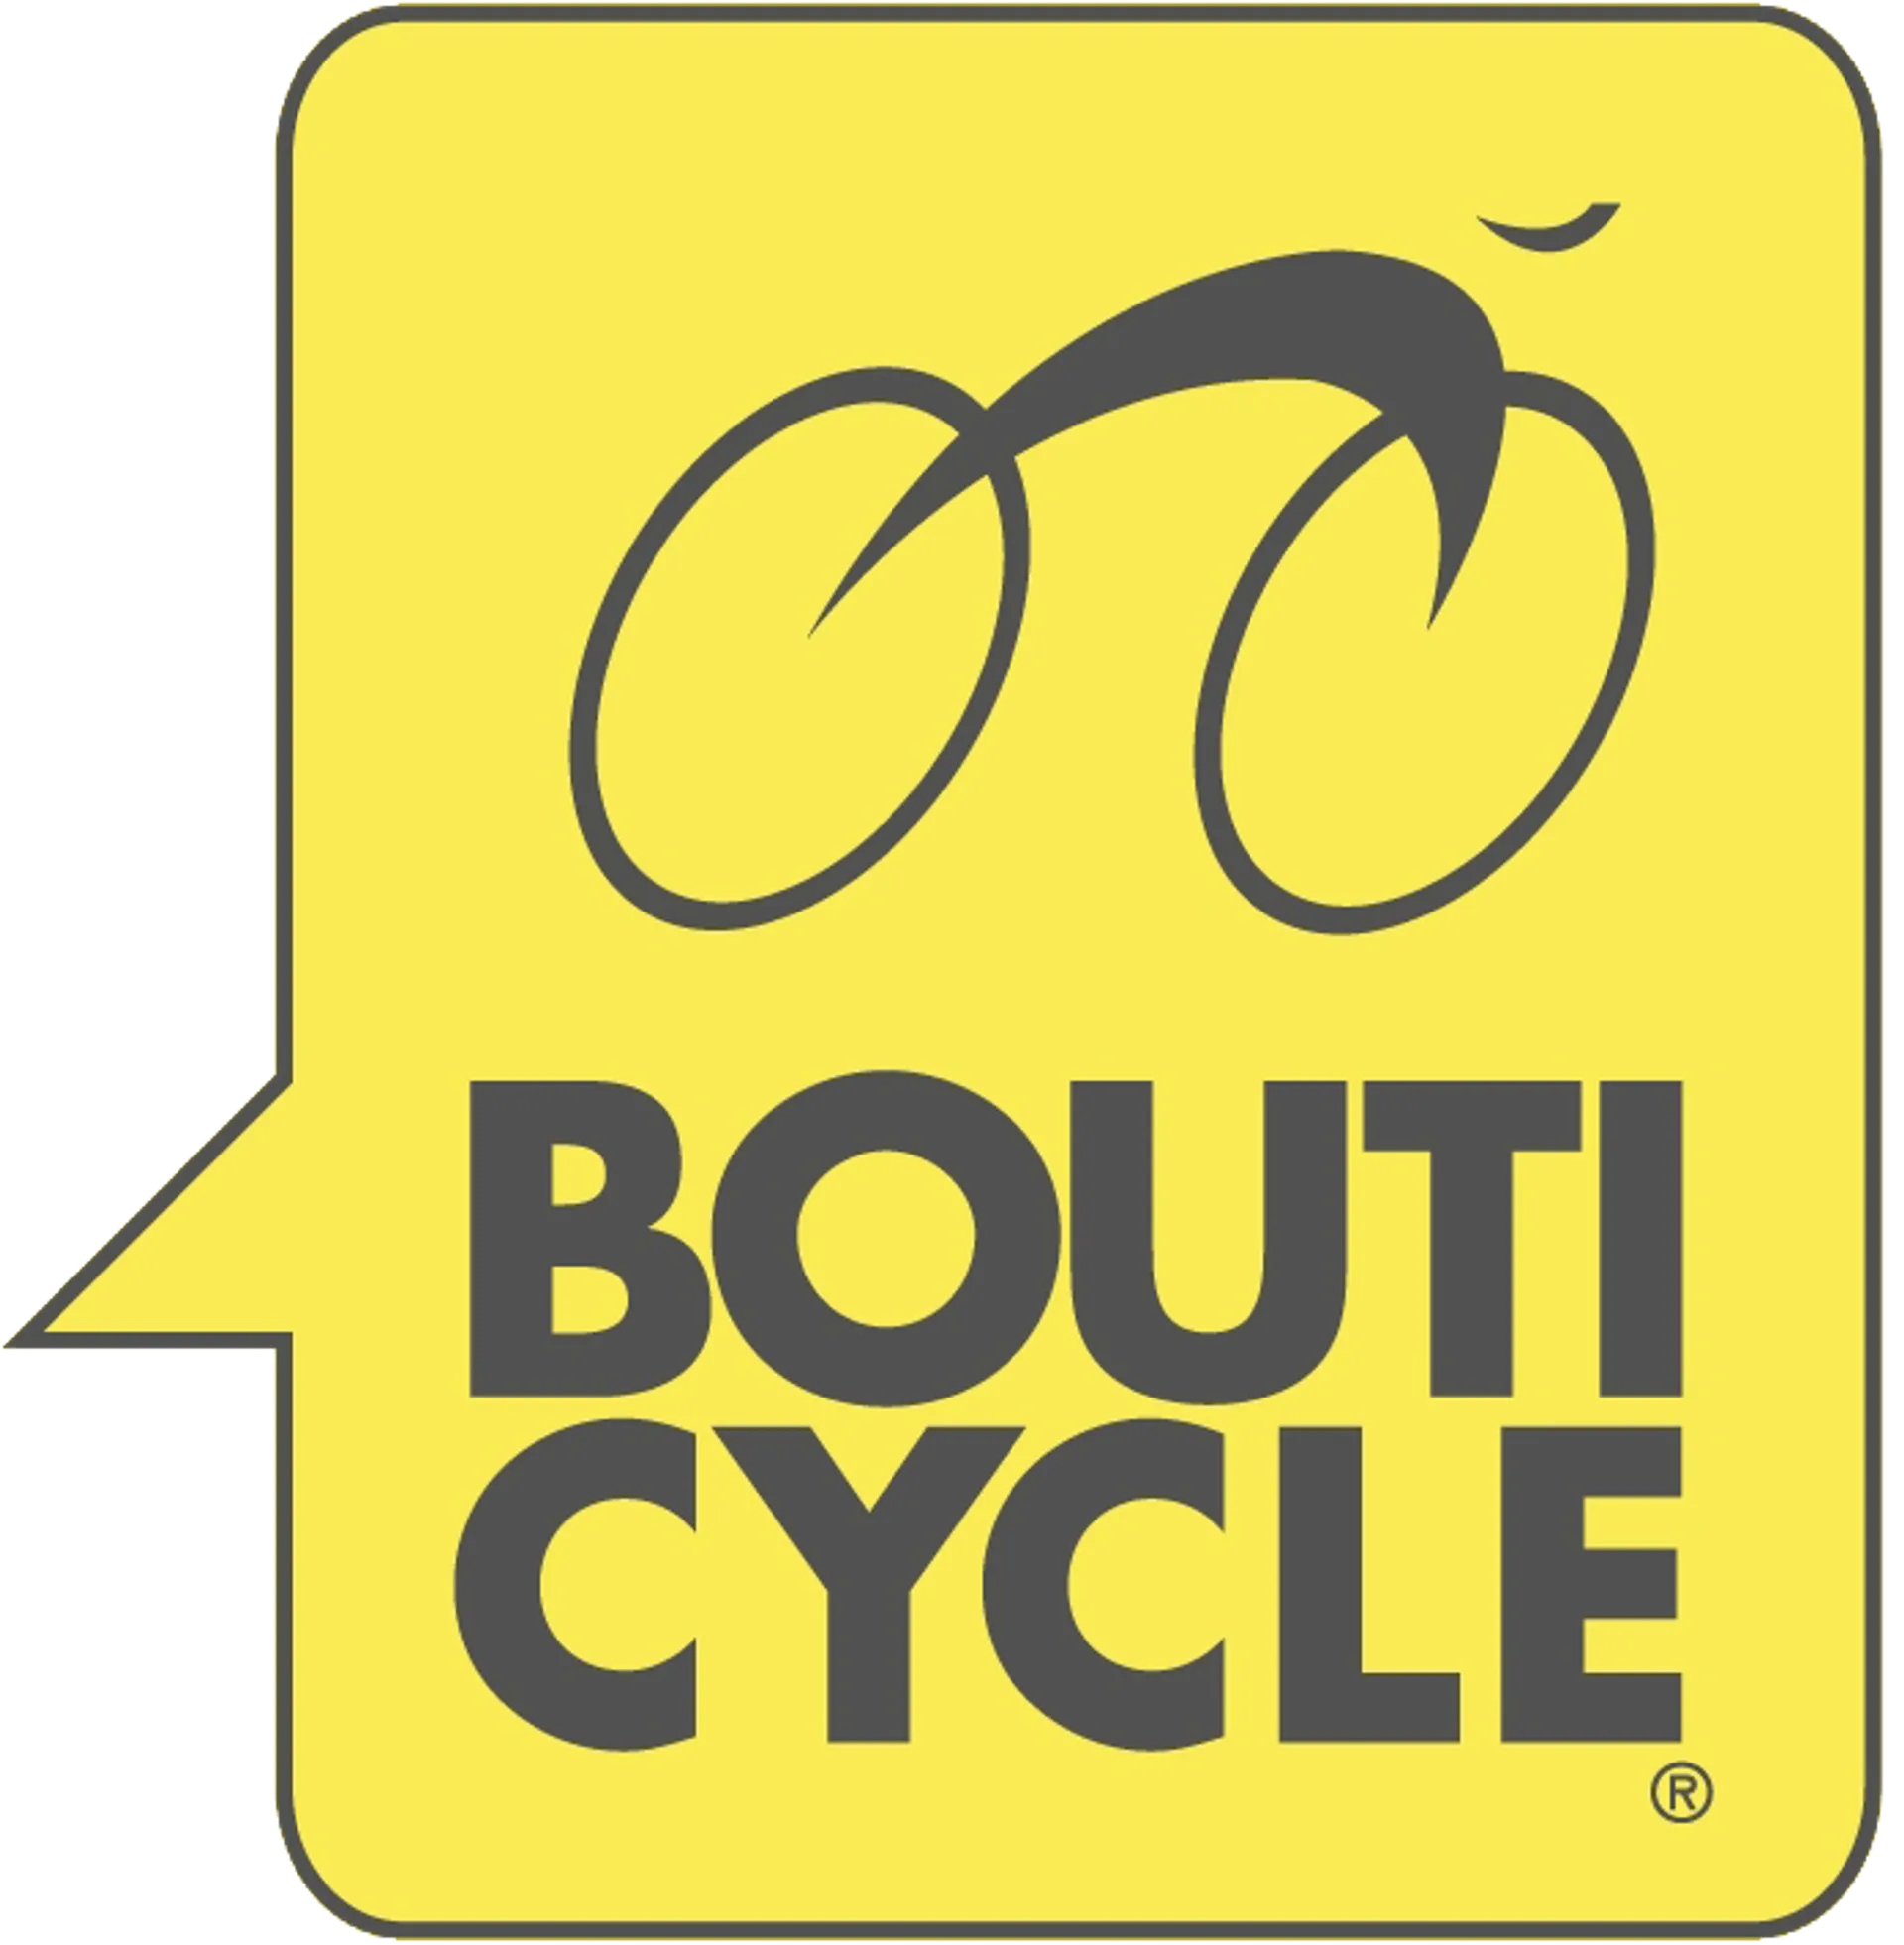 BOUTICYCLE logo